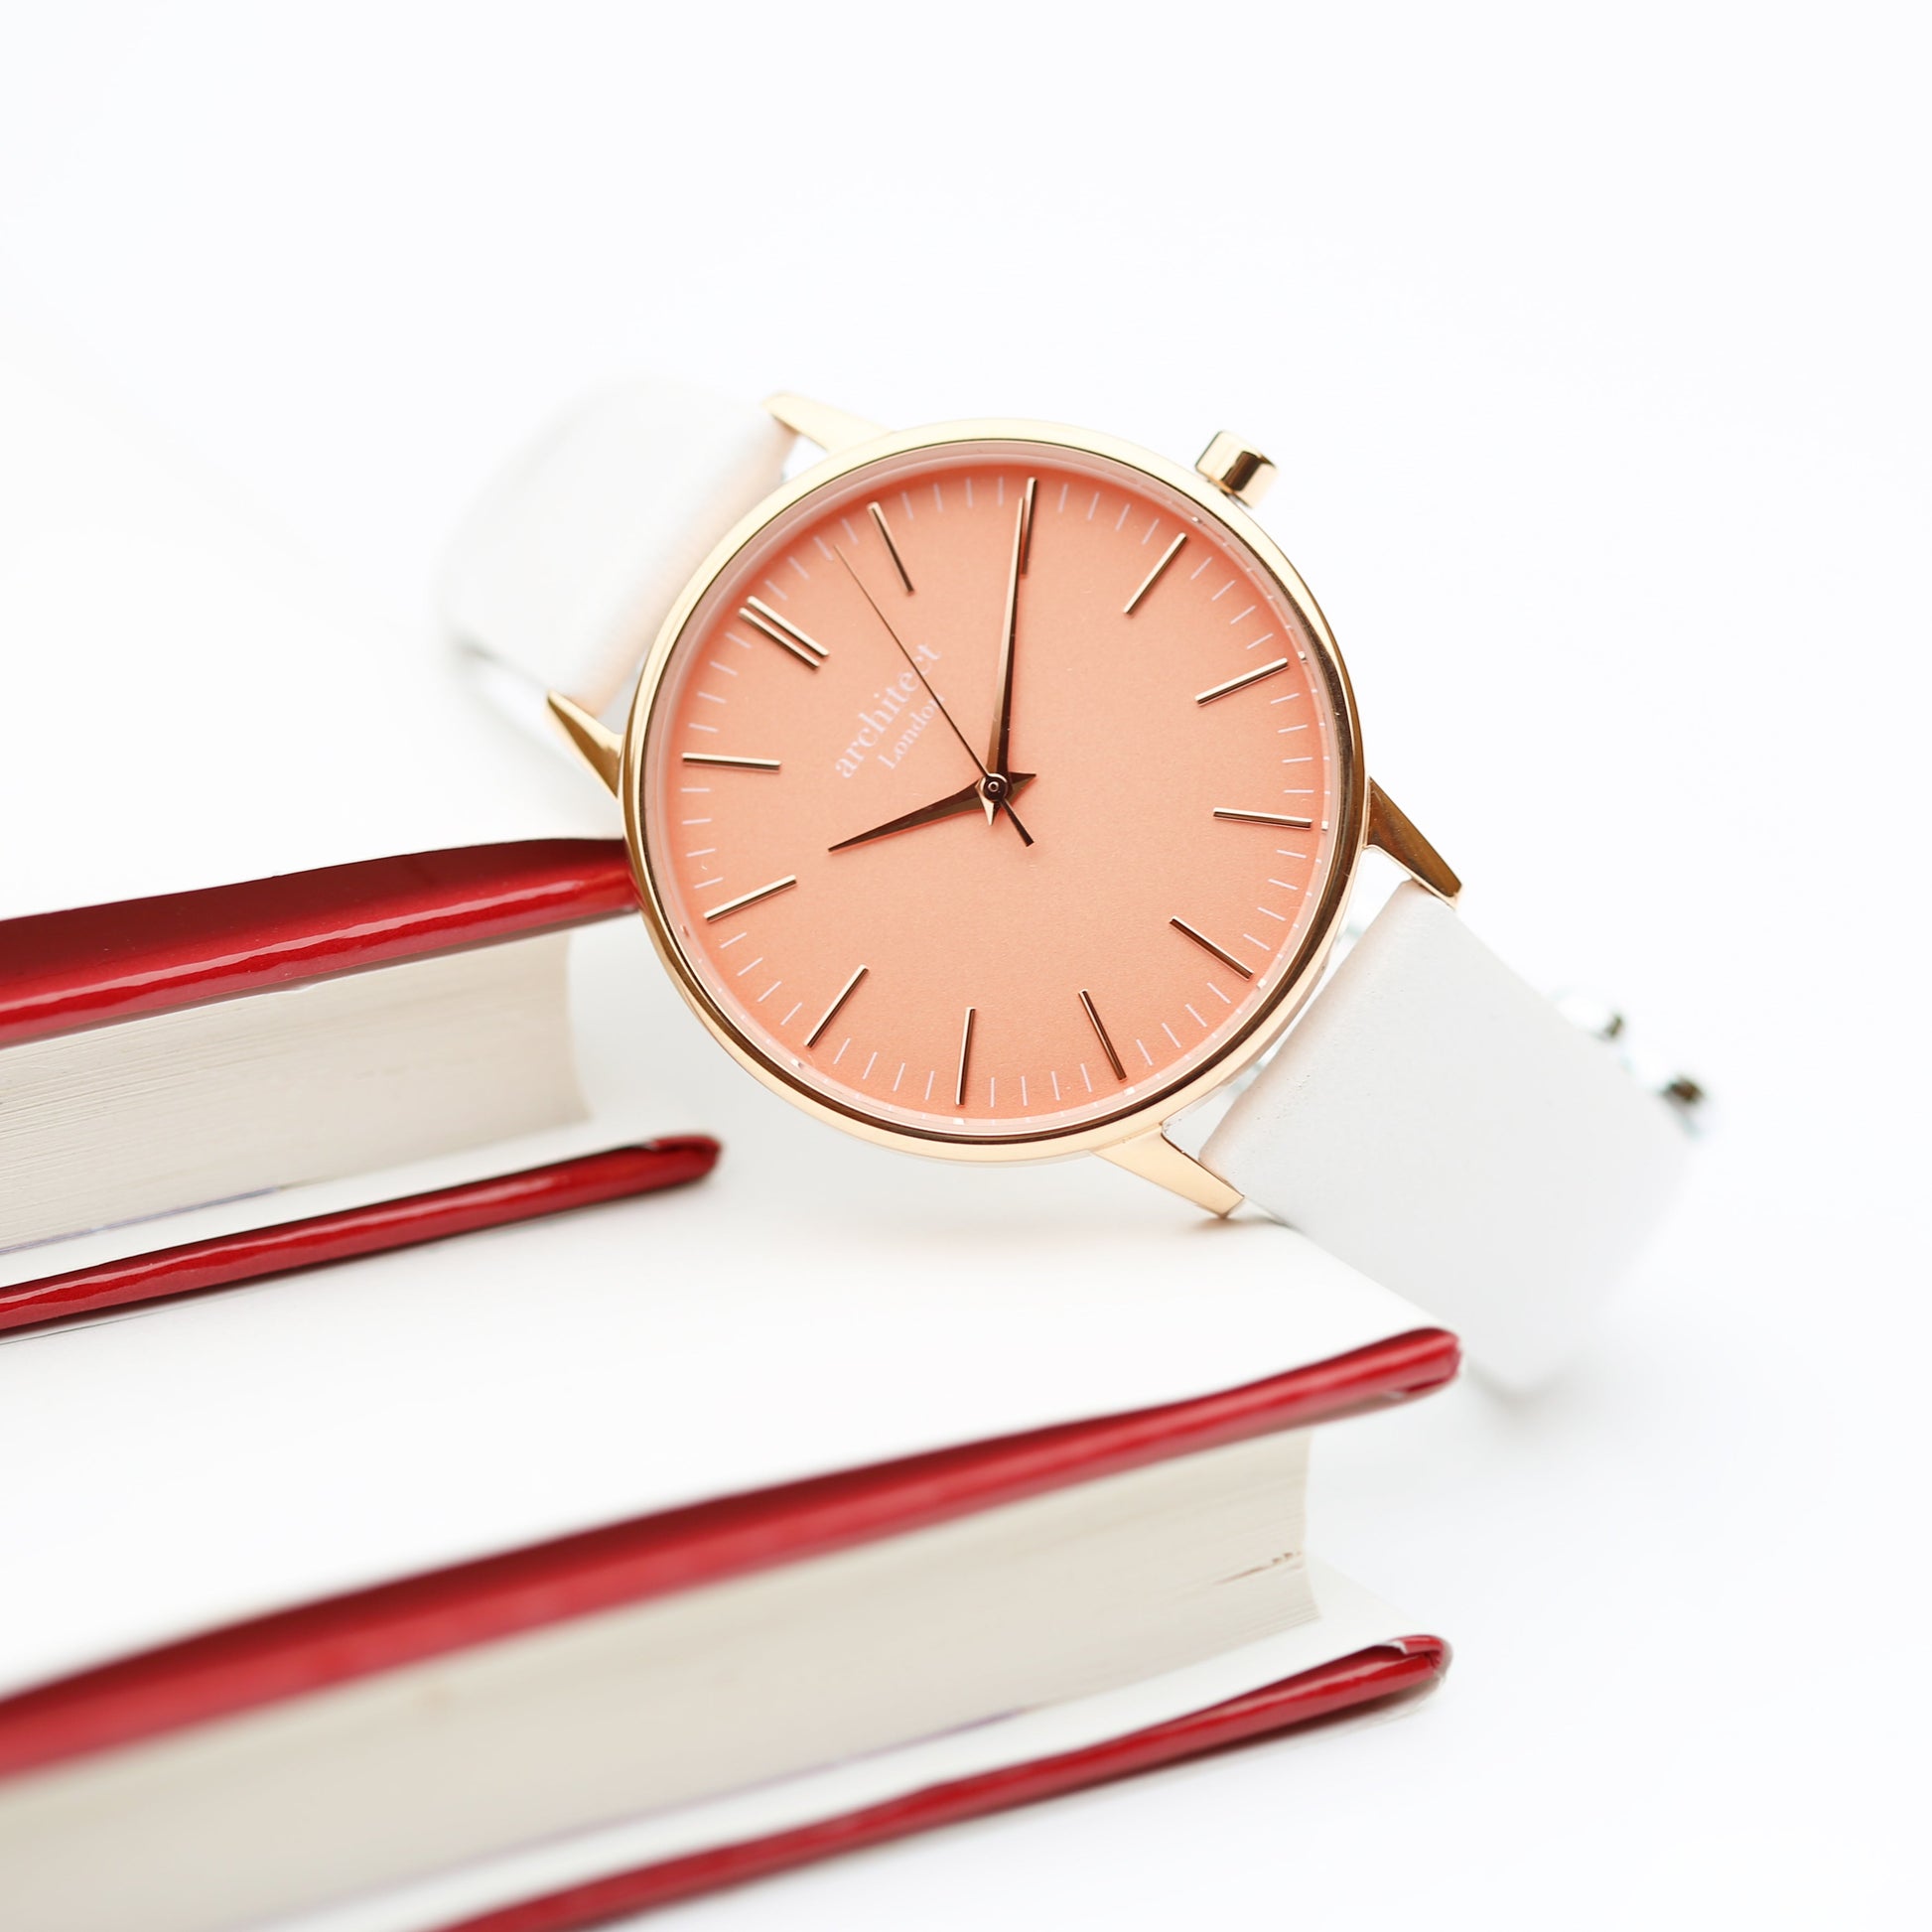 Personalized Ladies' Watches - Architect Coral Engraved Watch In White Strap 